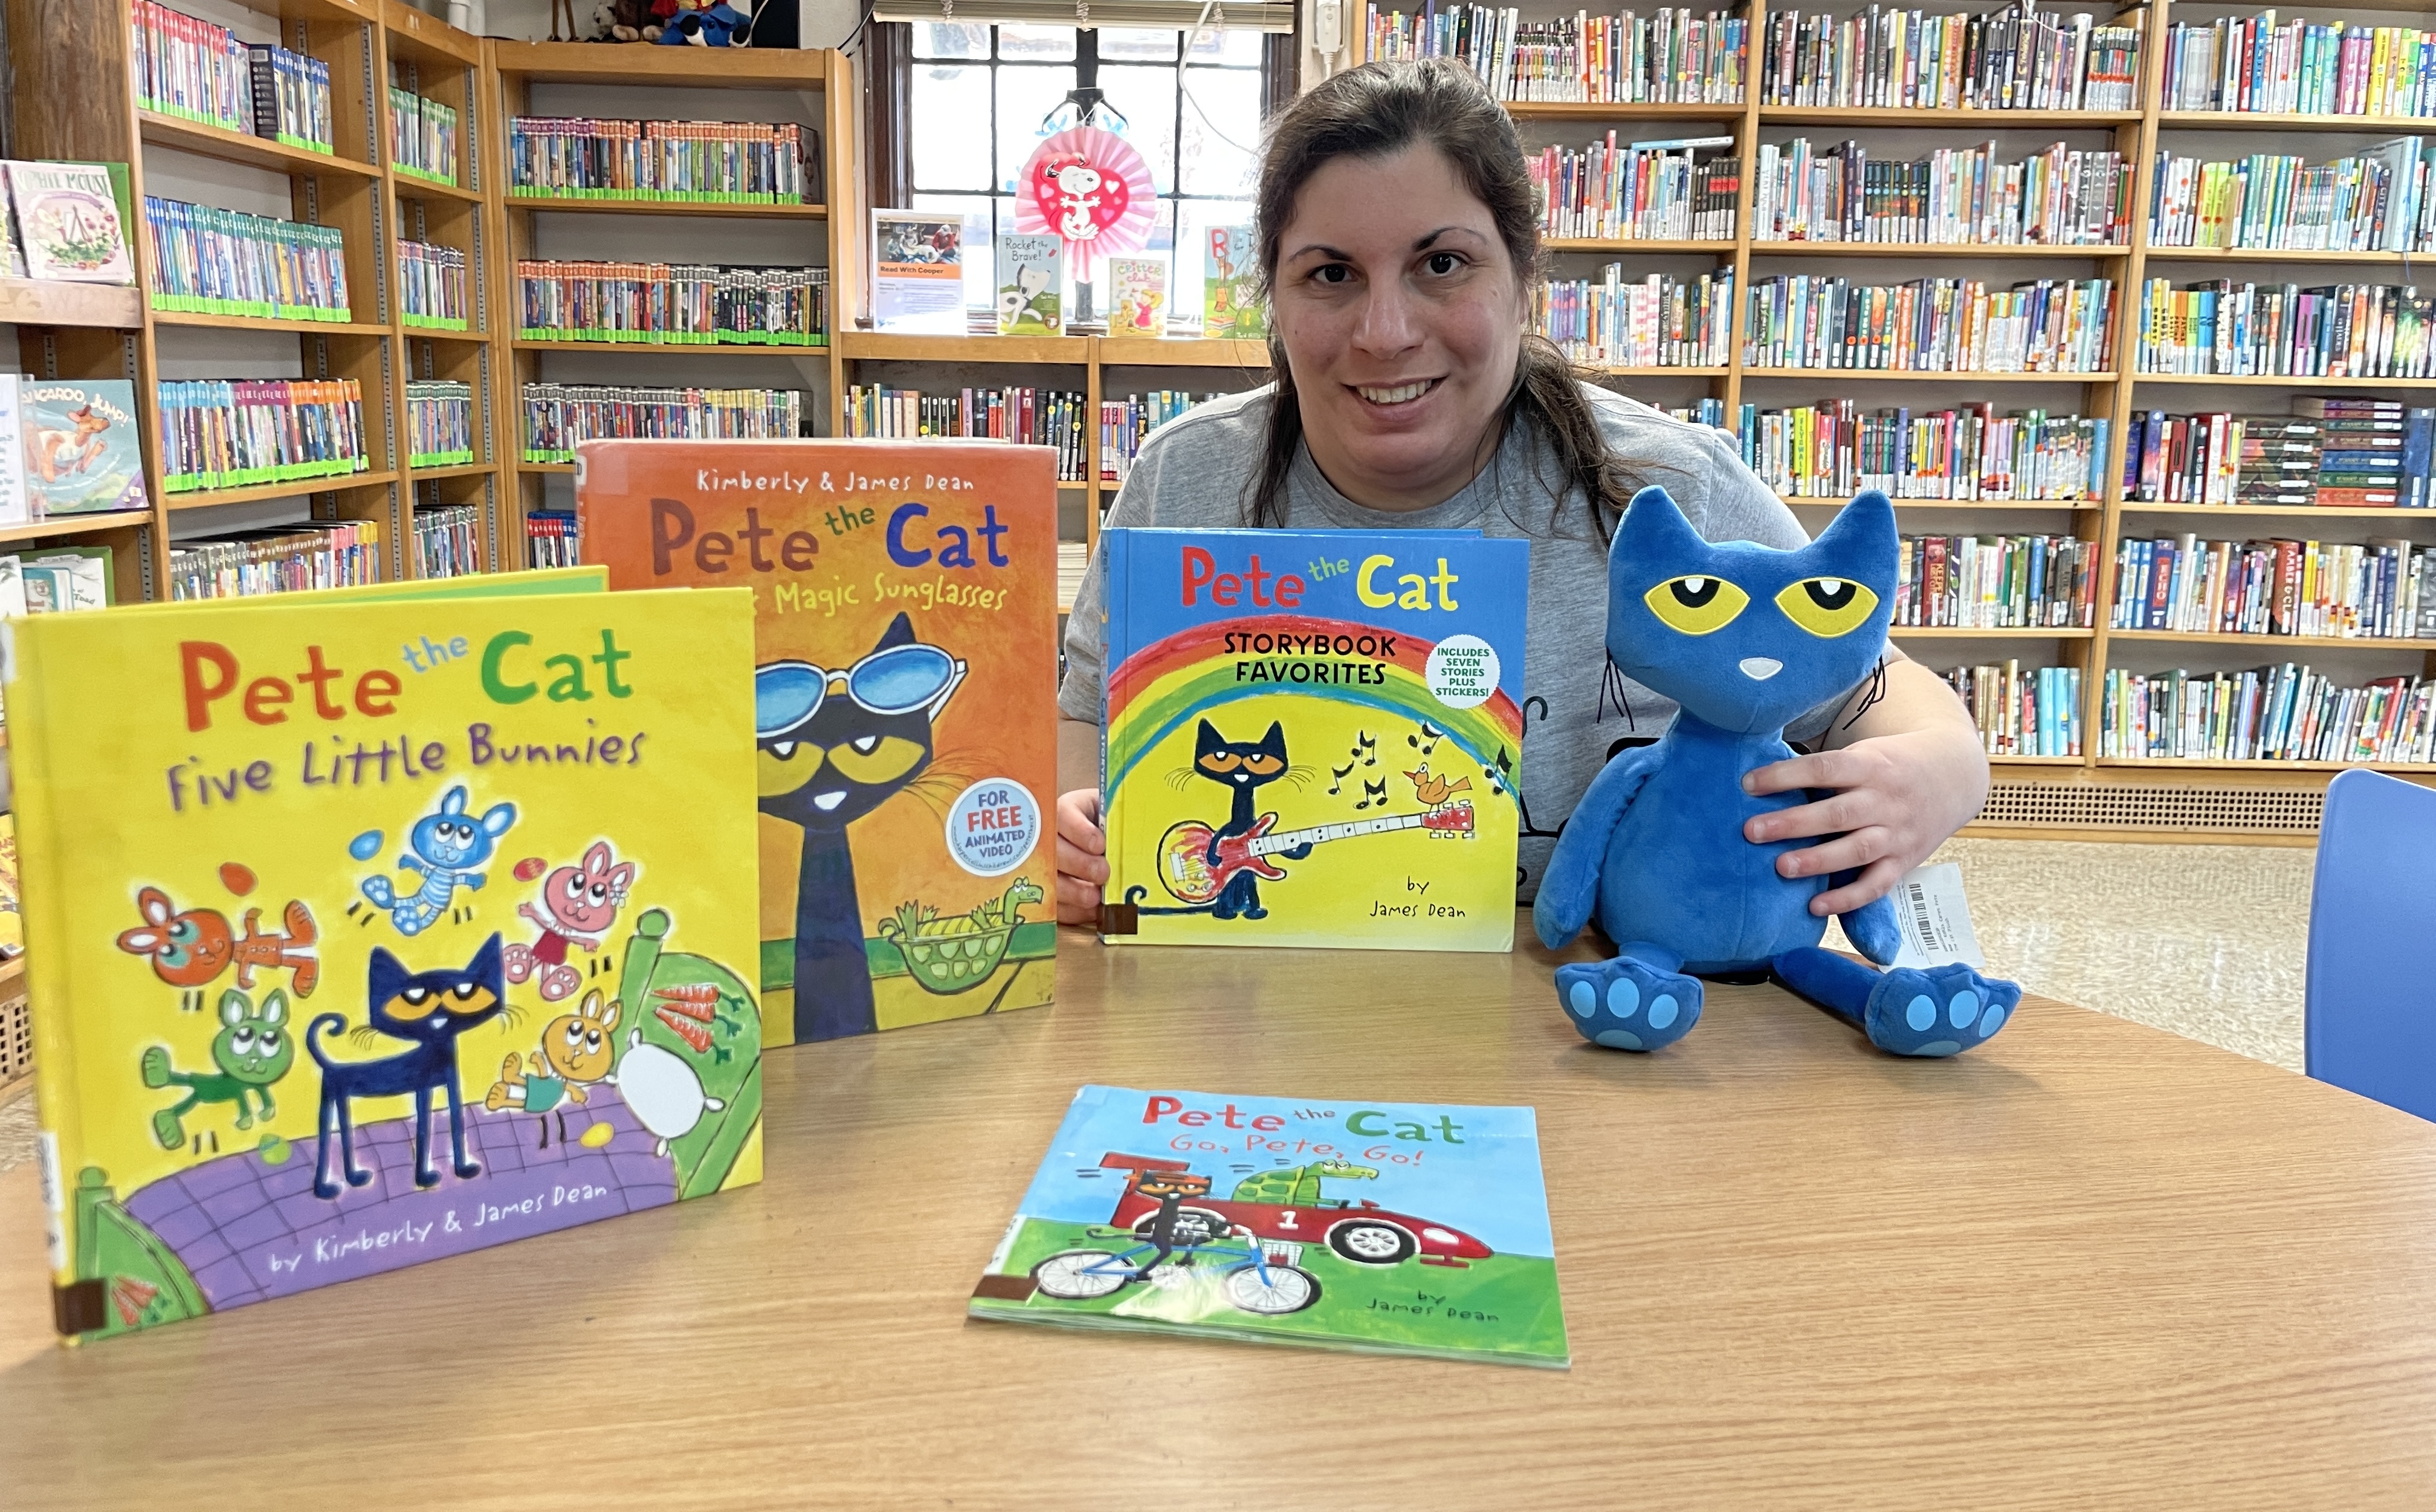 Image of Liz Caruso with Pete the Cat books and Pete Plushie